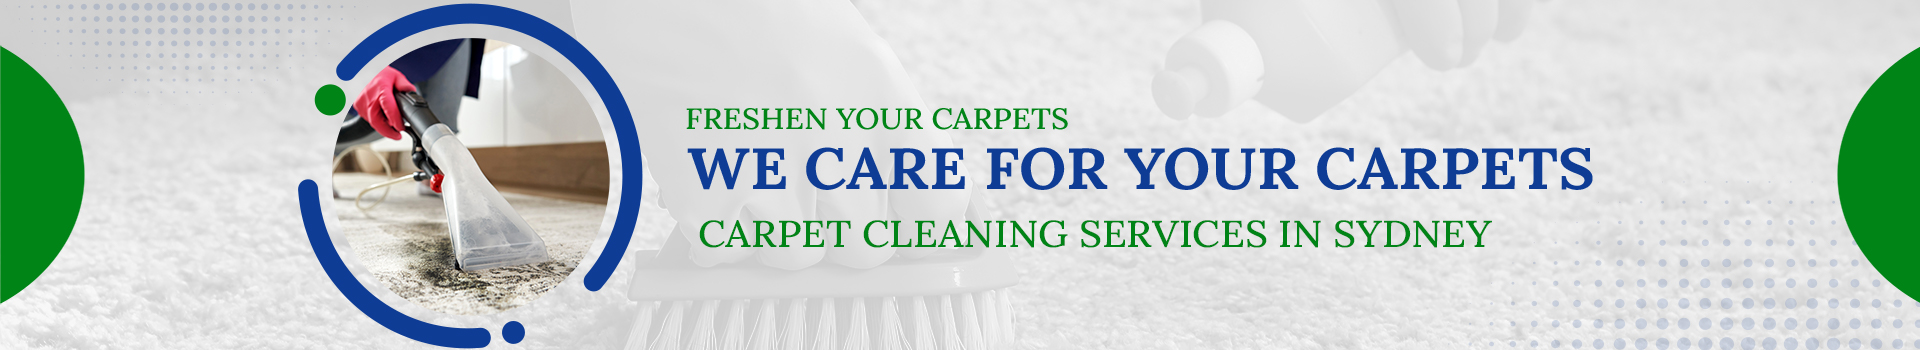 Carpet Cleaning services In SYDNEY